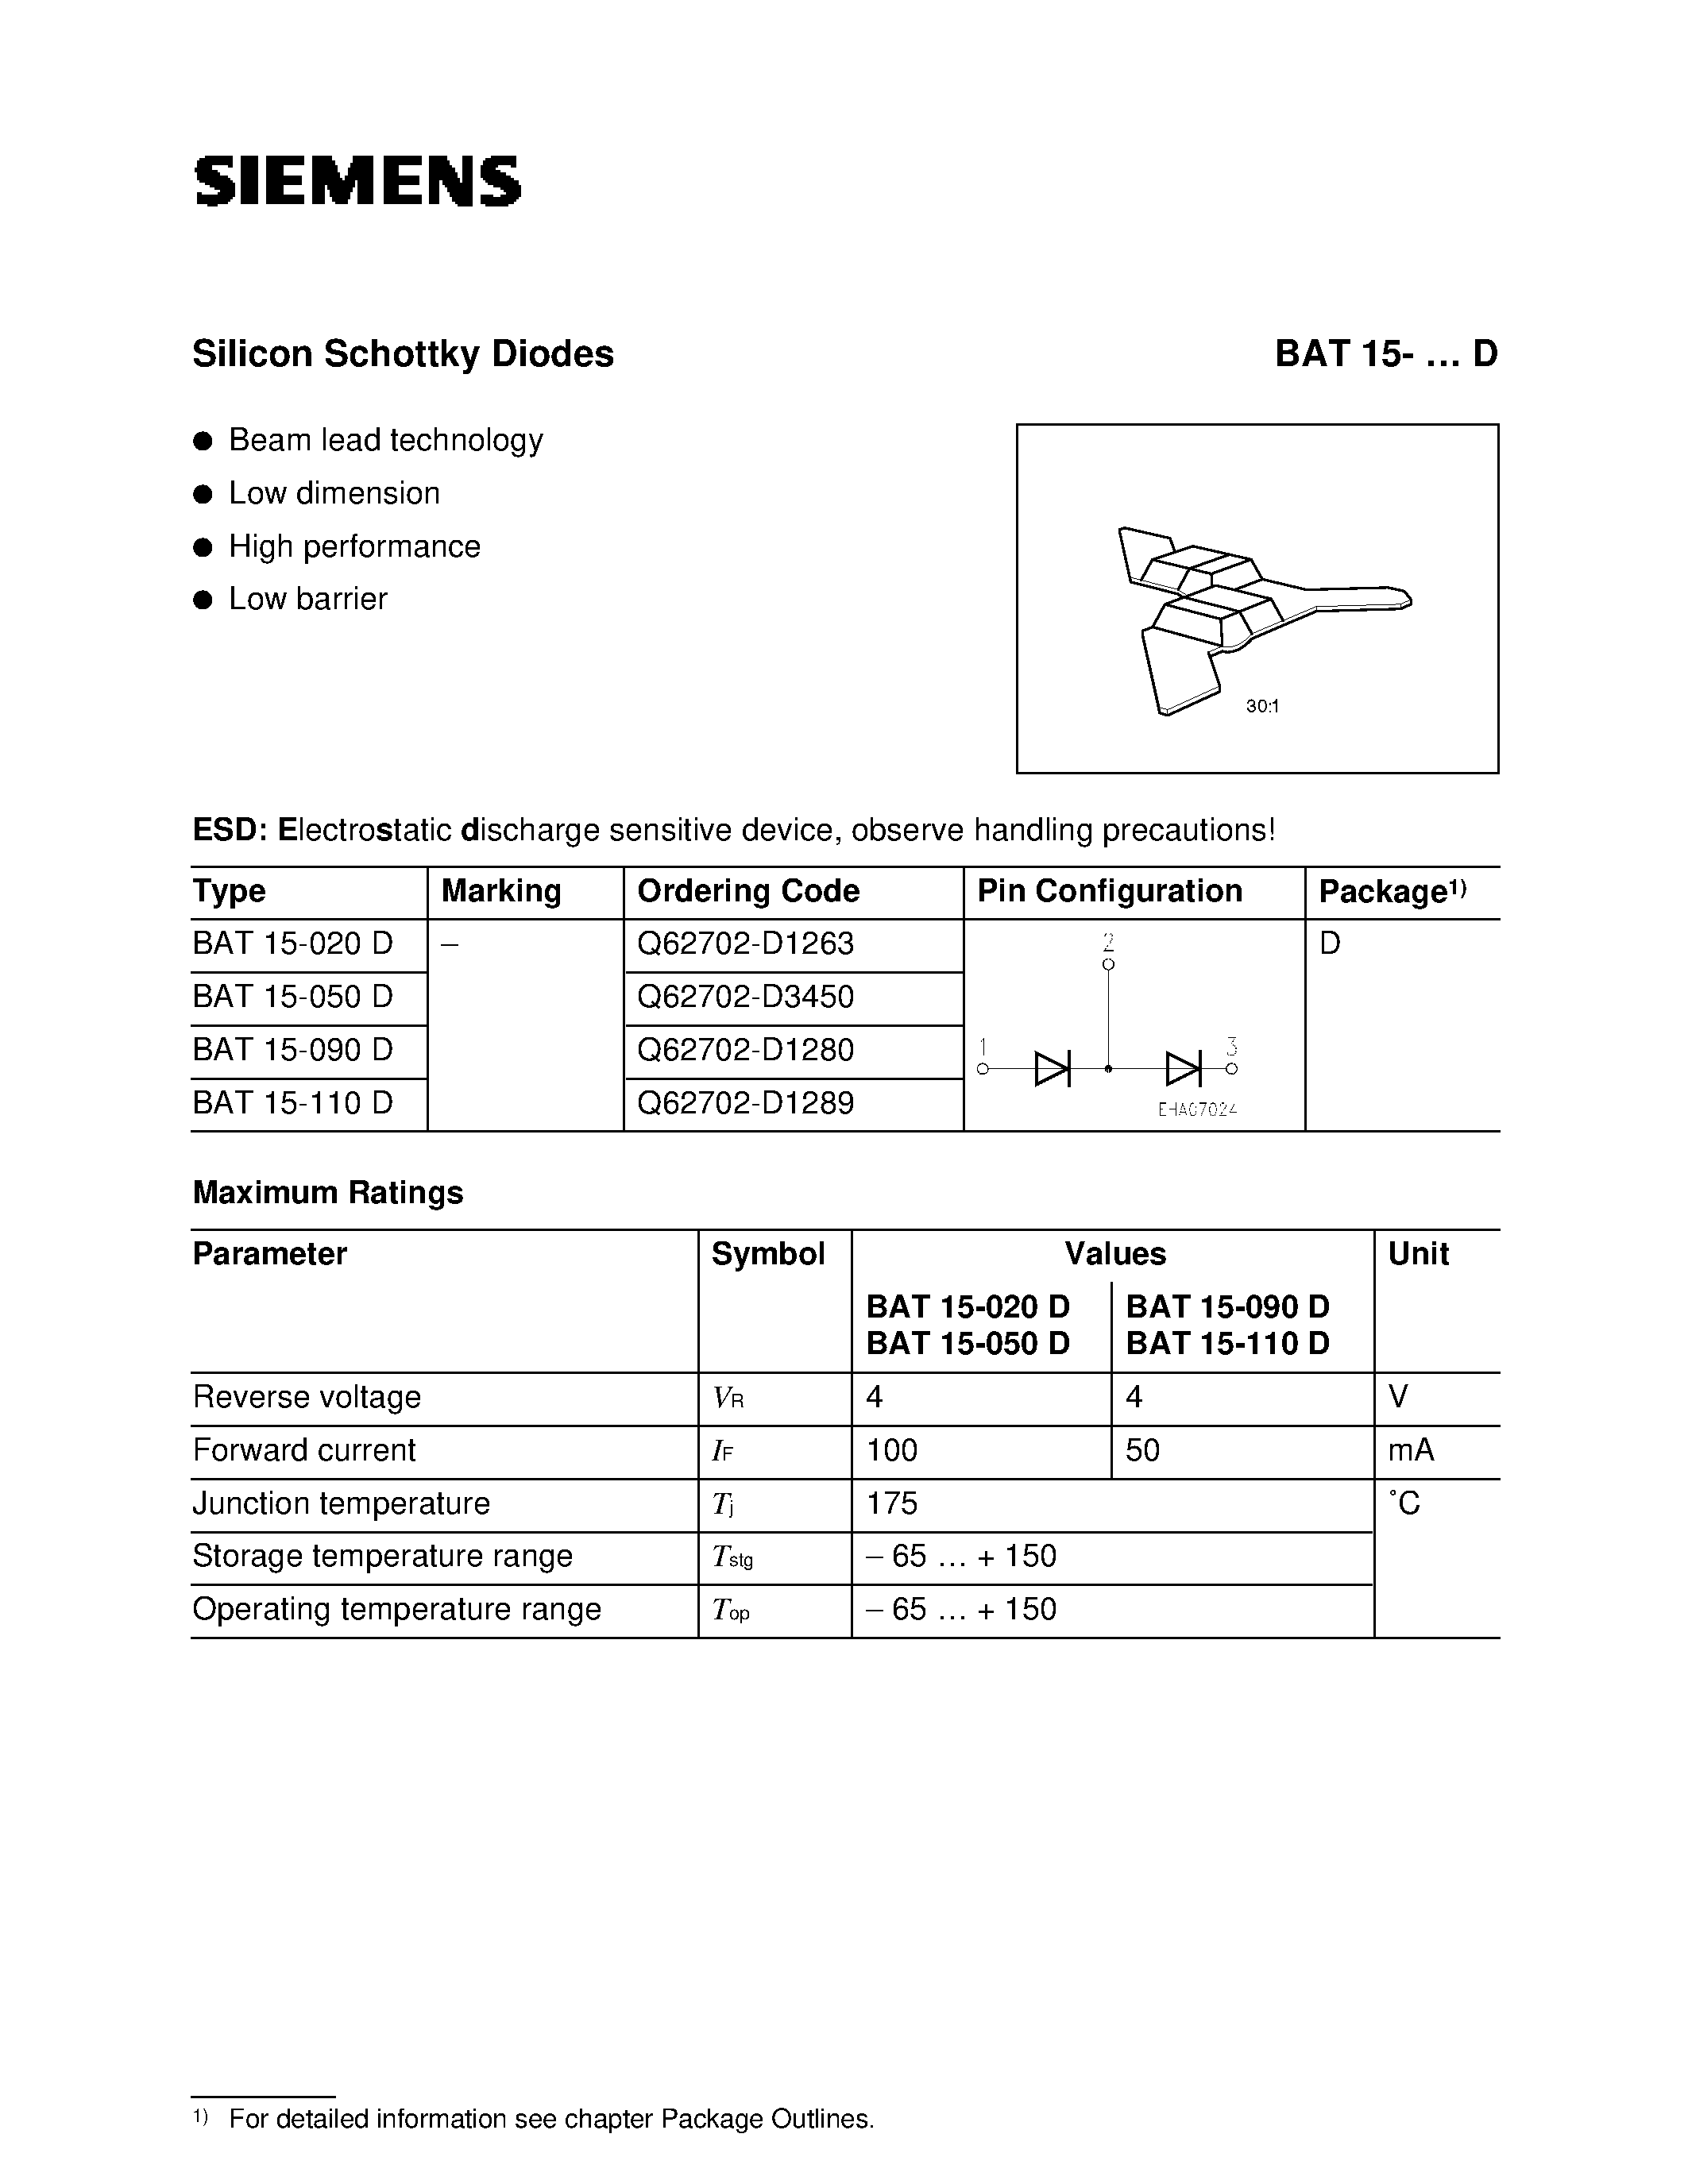 Datasheet BAT15-020D - Silicon Schottky Diodes (Beam lead technology Low dimension High performance Low barrier) page 1